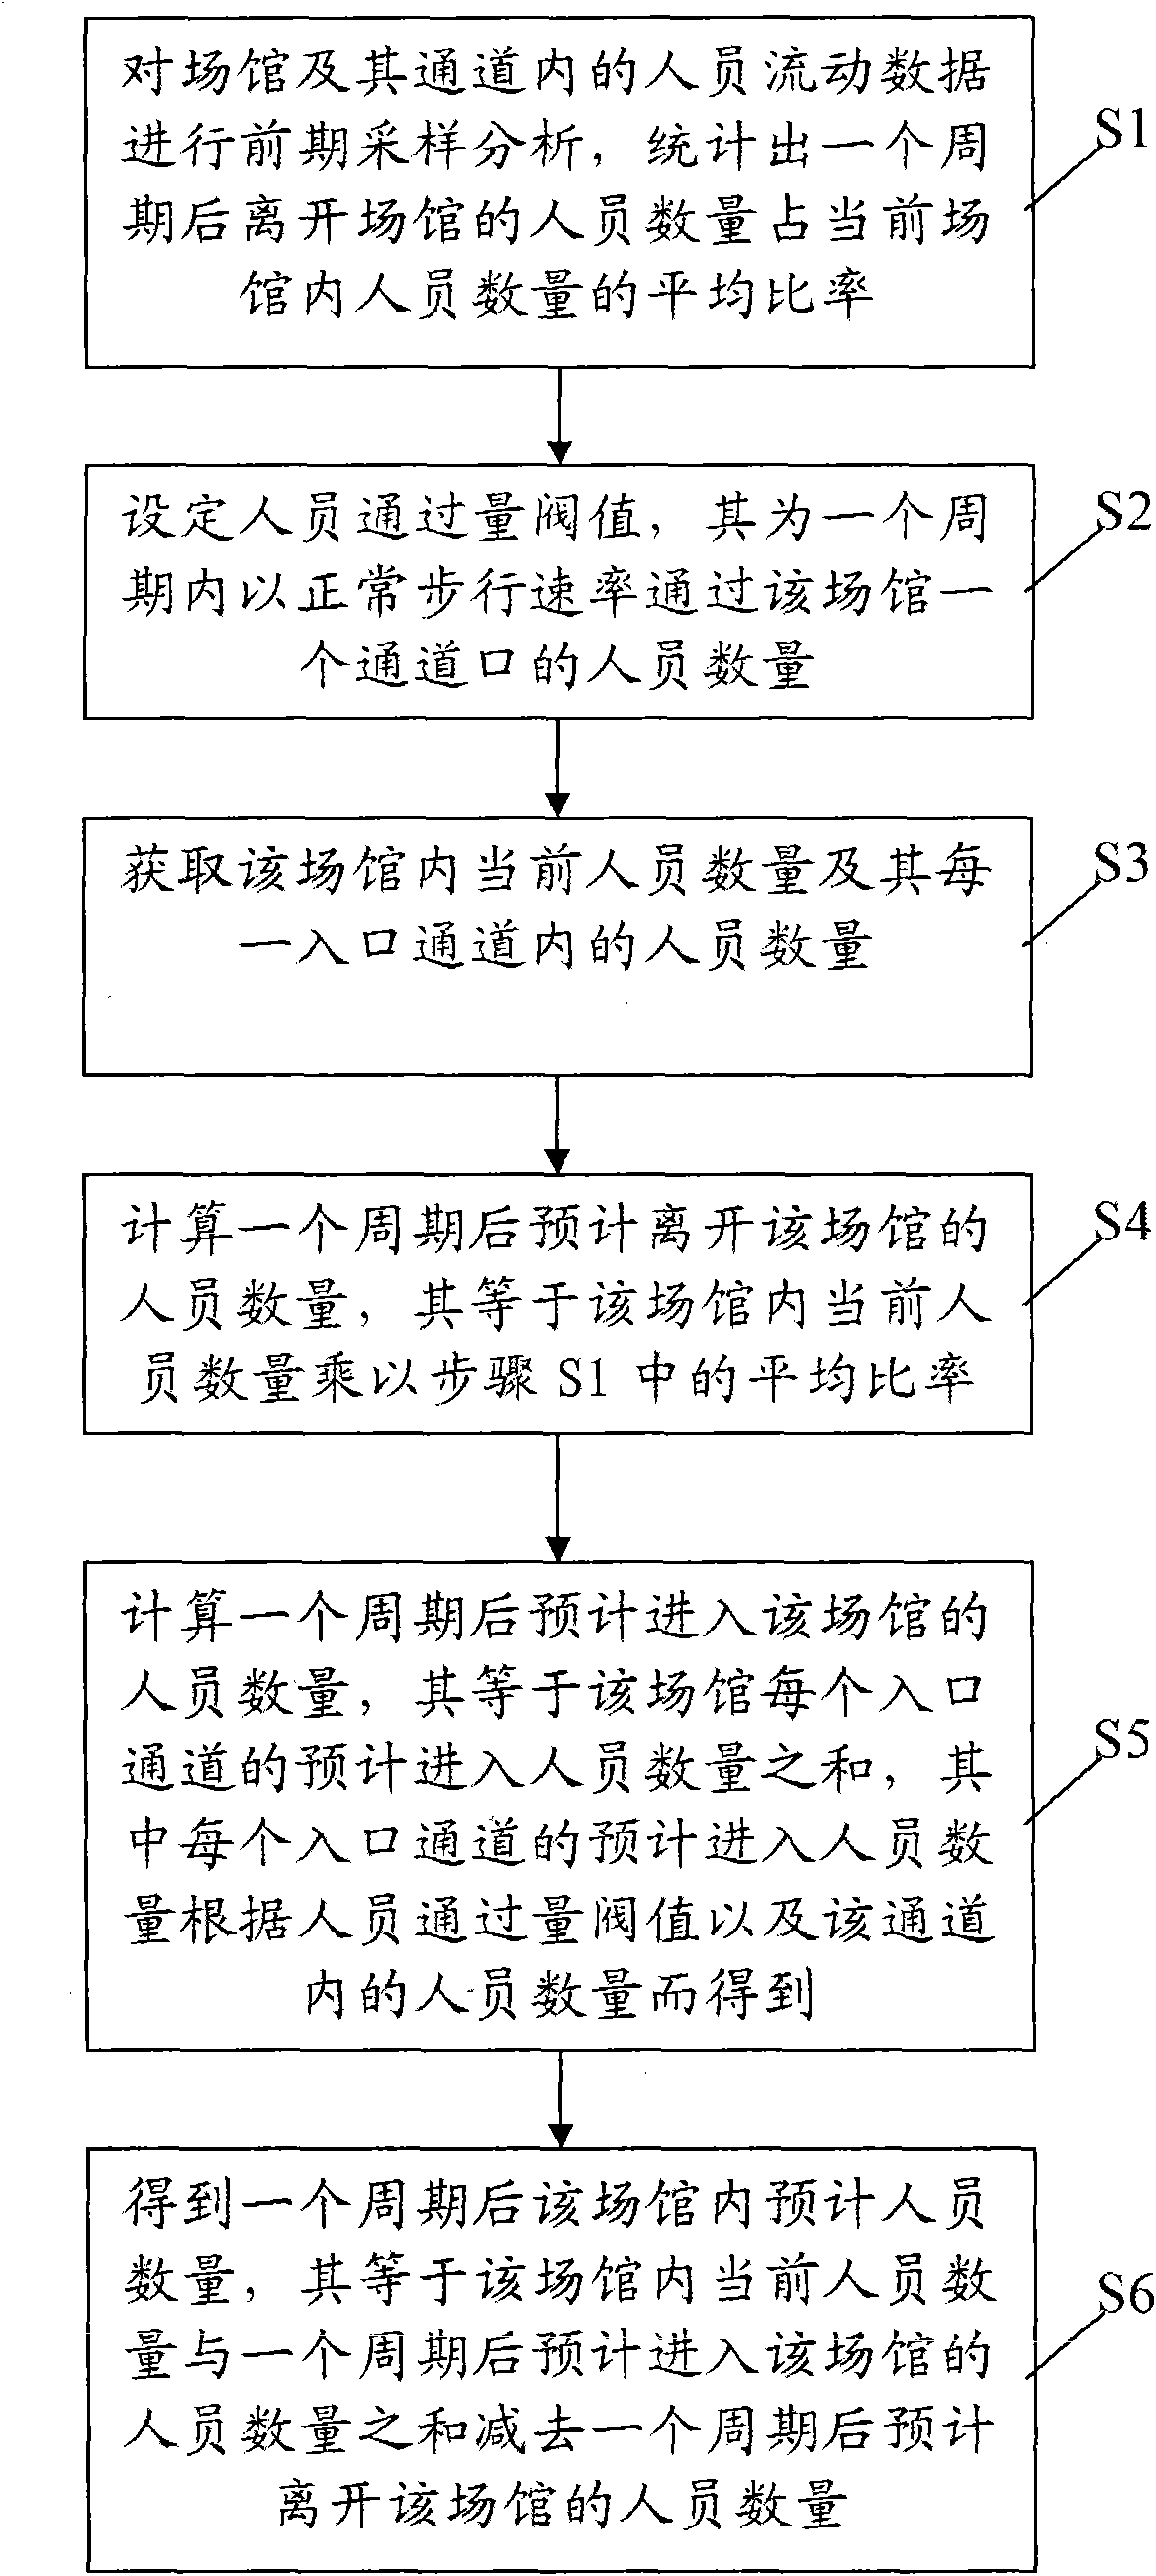 Method and system for predicating staff flow